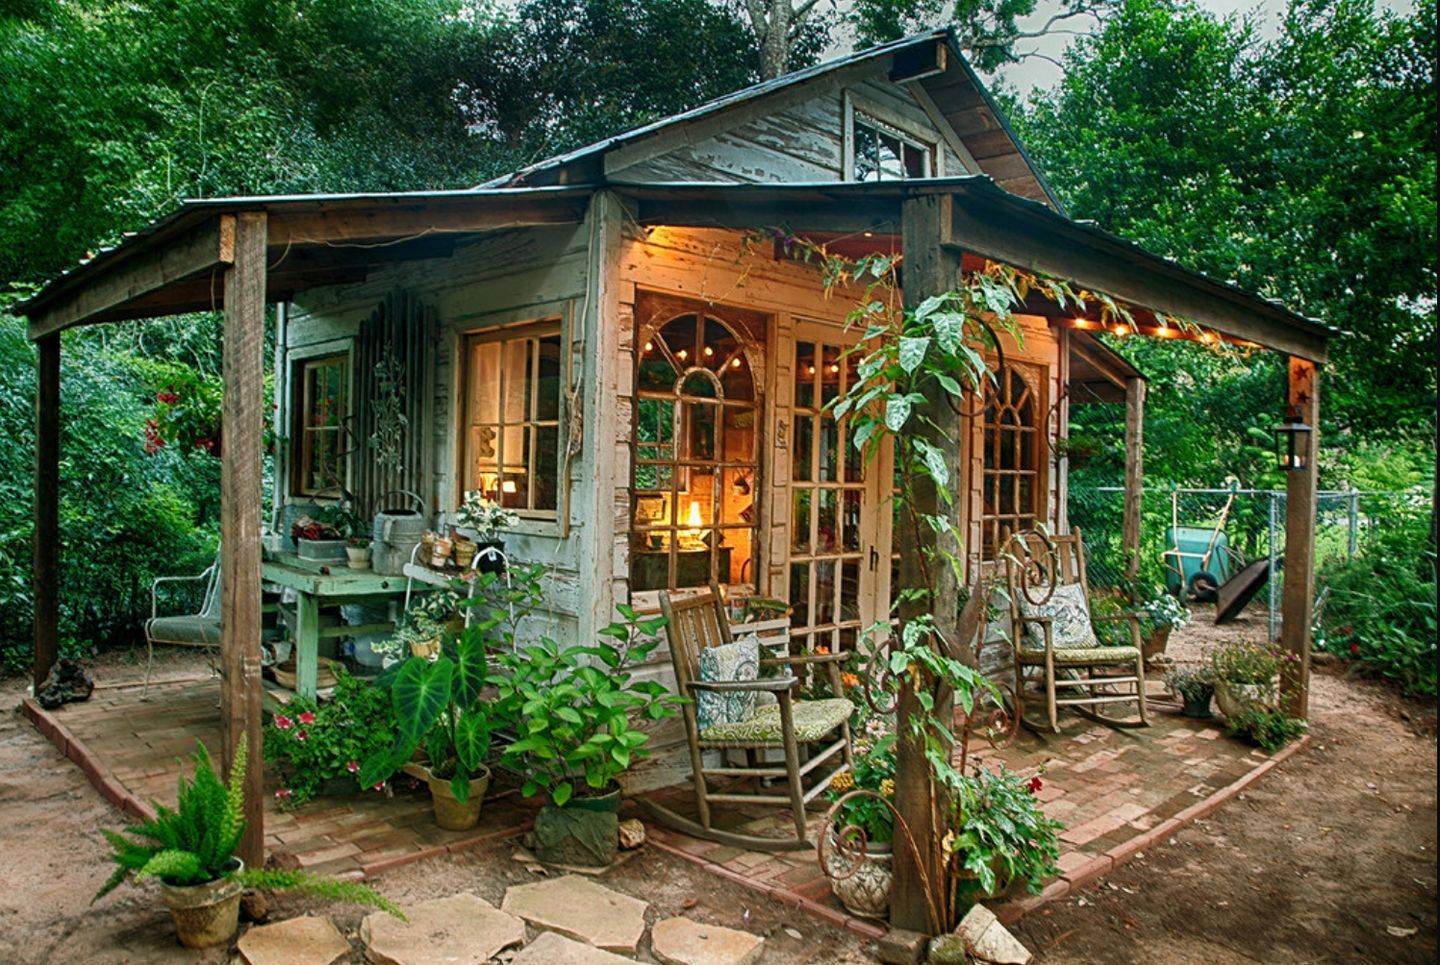 These Rustic Shed